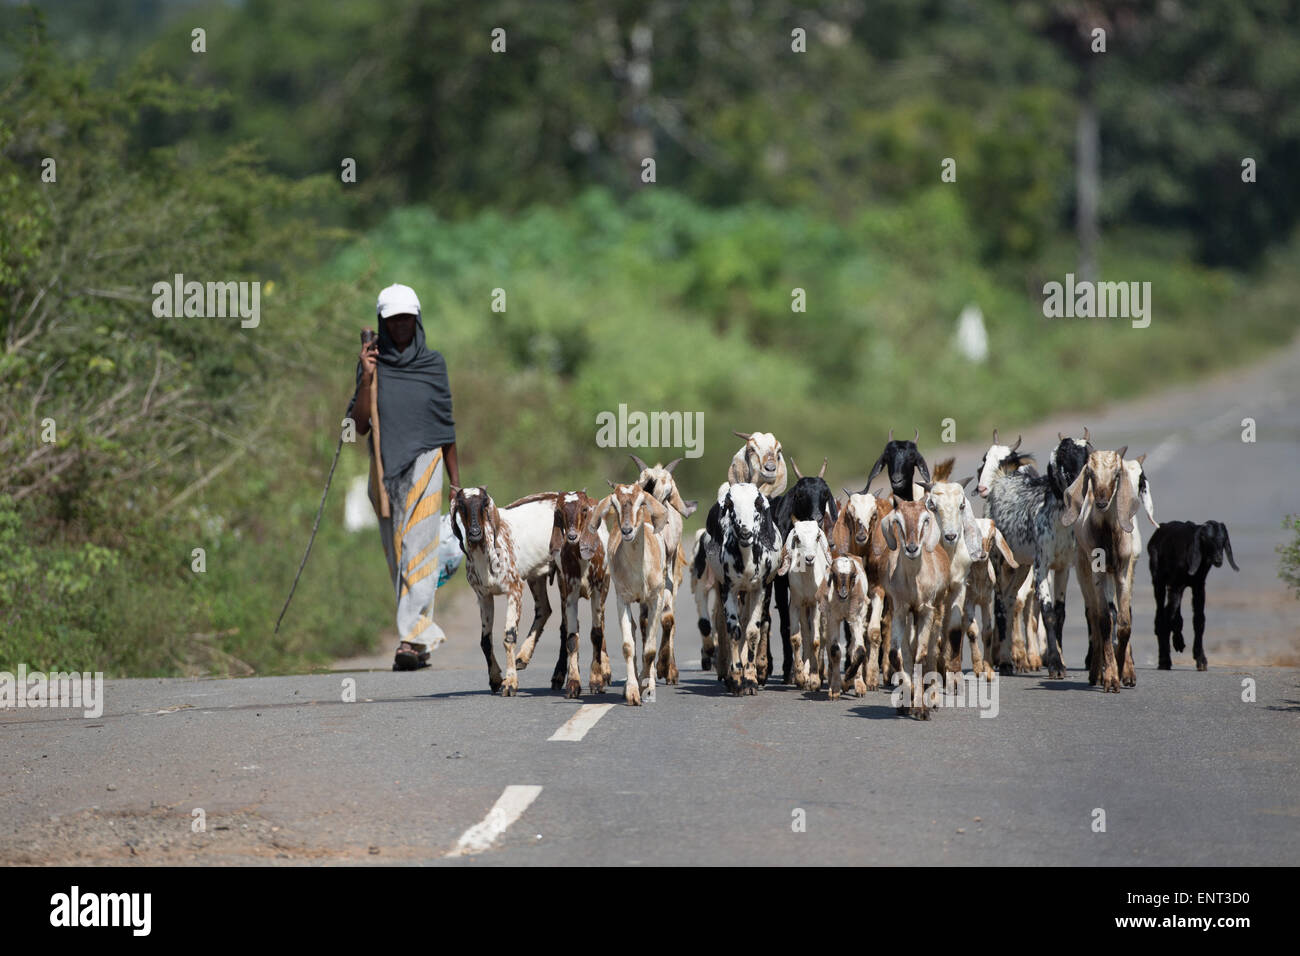 A villager leads a herd of goats along a remote village road in Tantrimale near Anuradhapura, Sri Lanka. Stock Photo